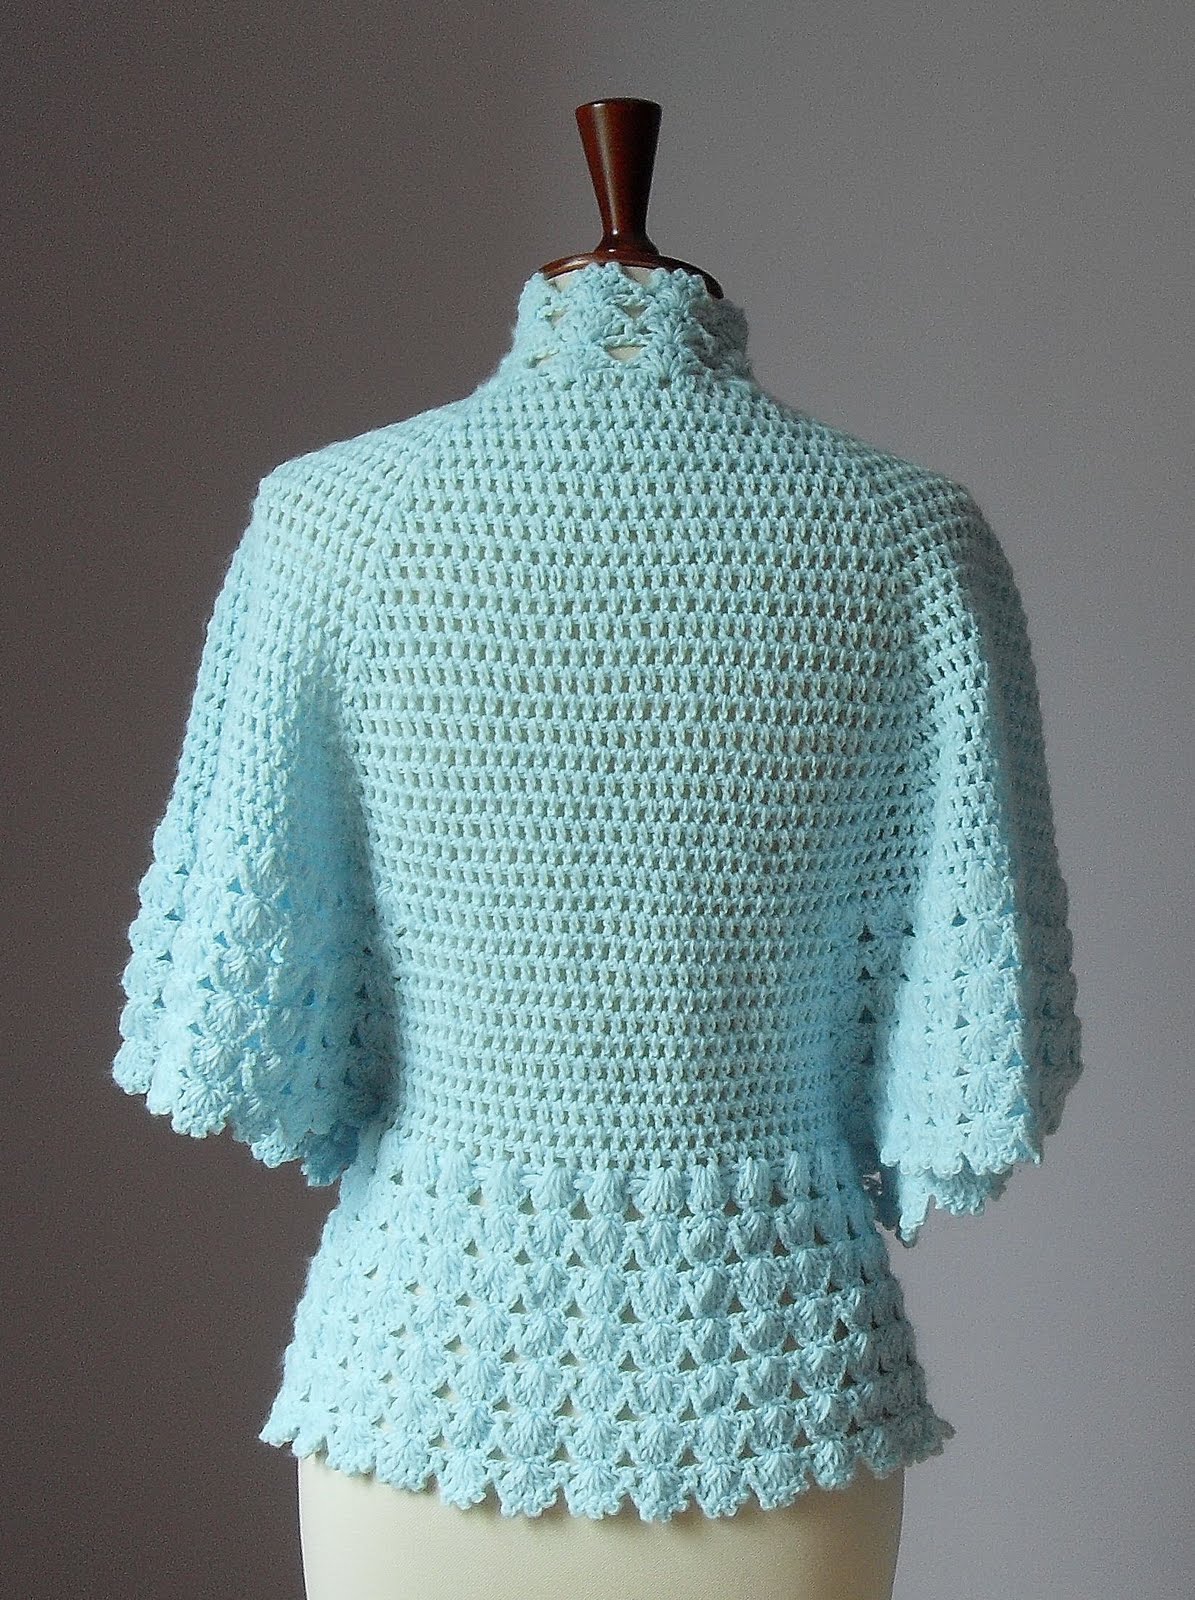 SILVIA66: Crocheted bed jacket or light cardigan